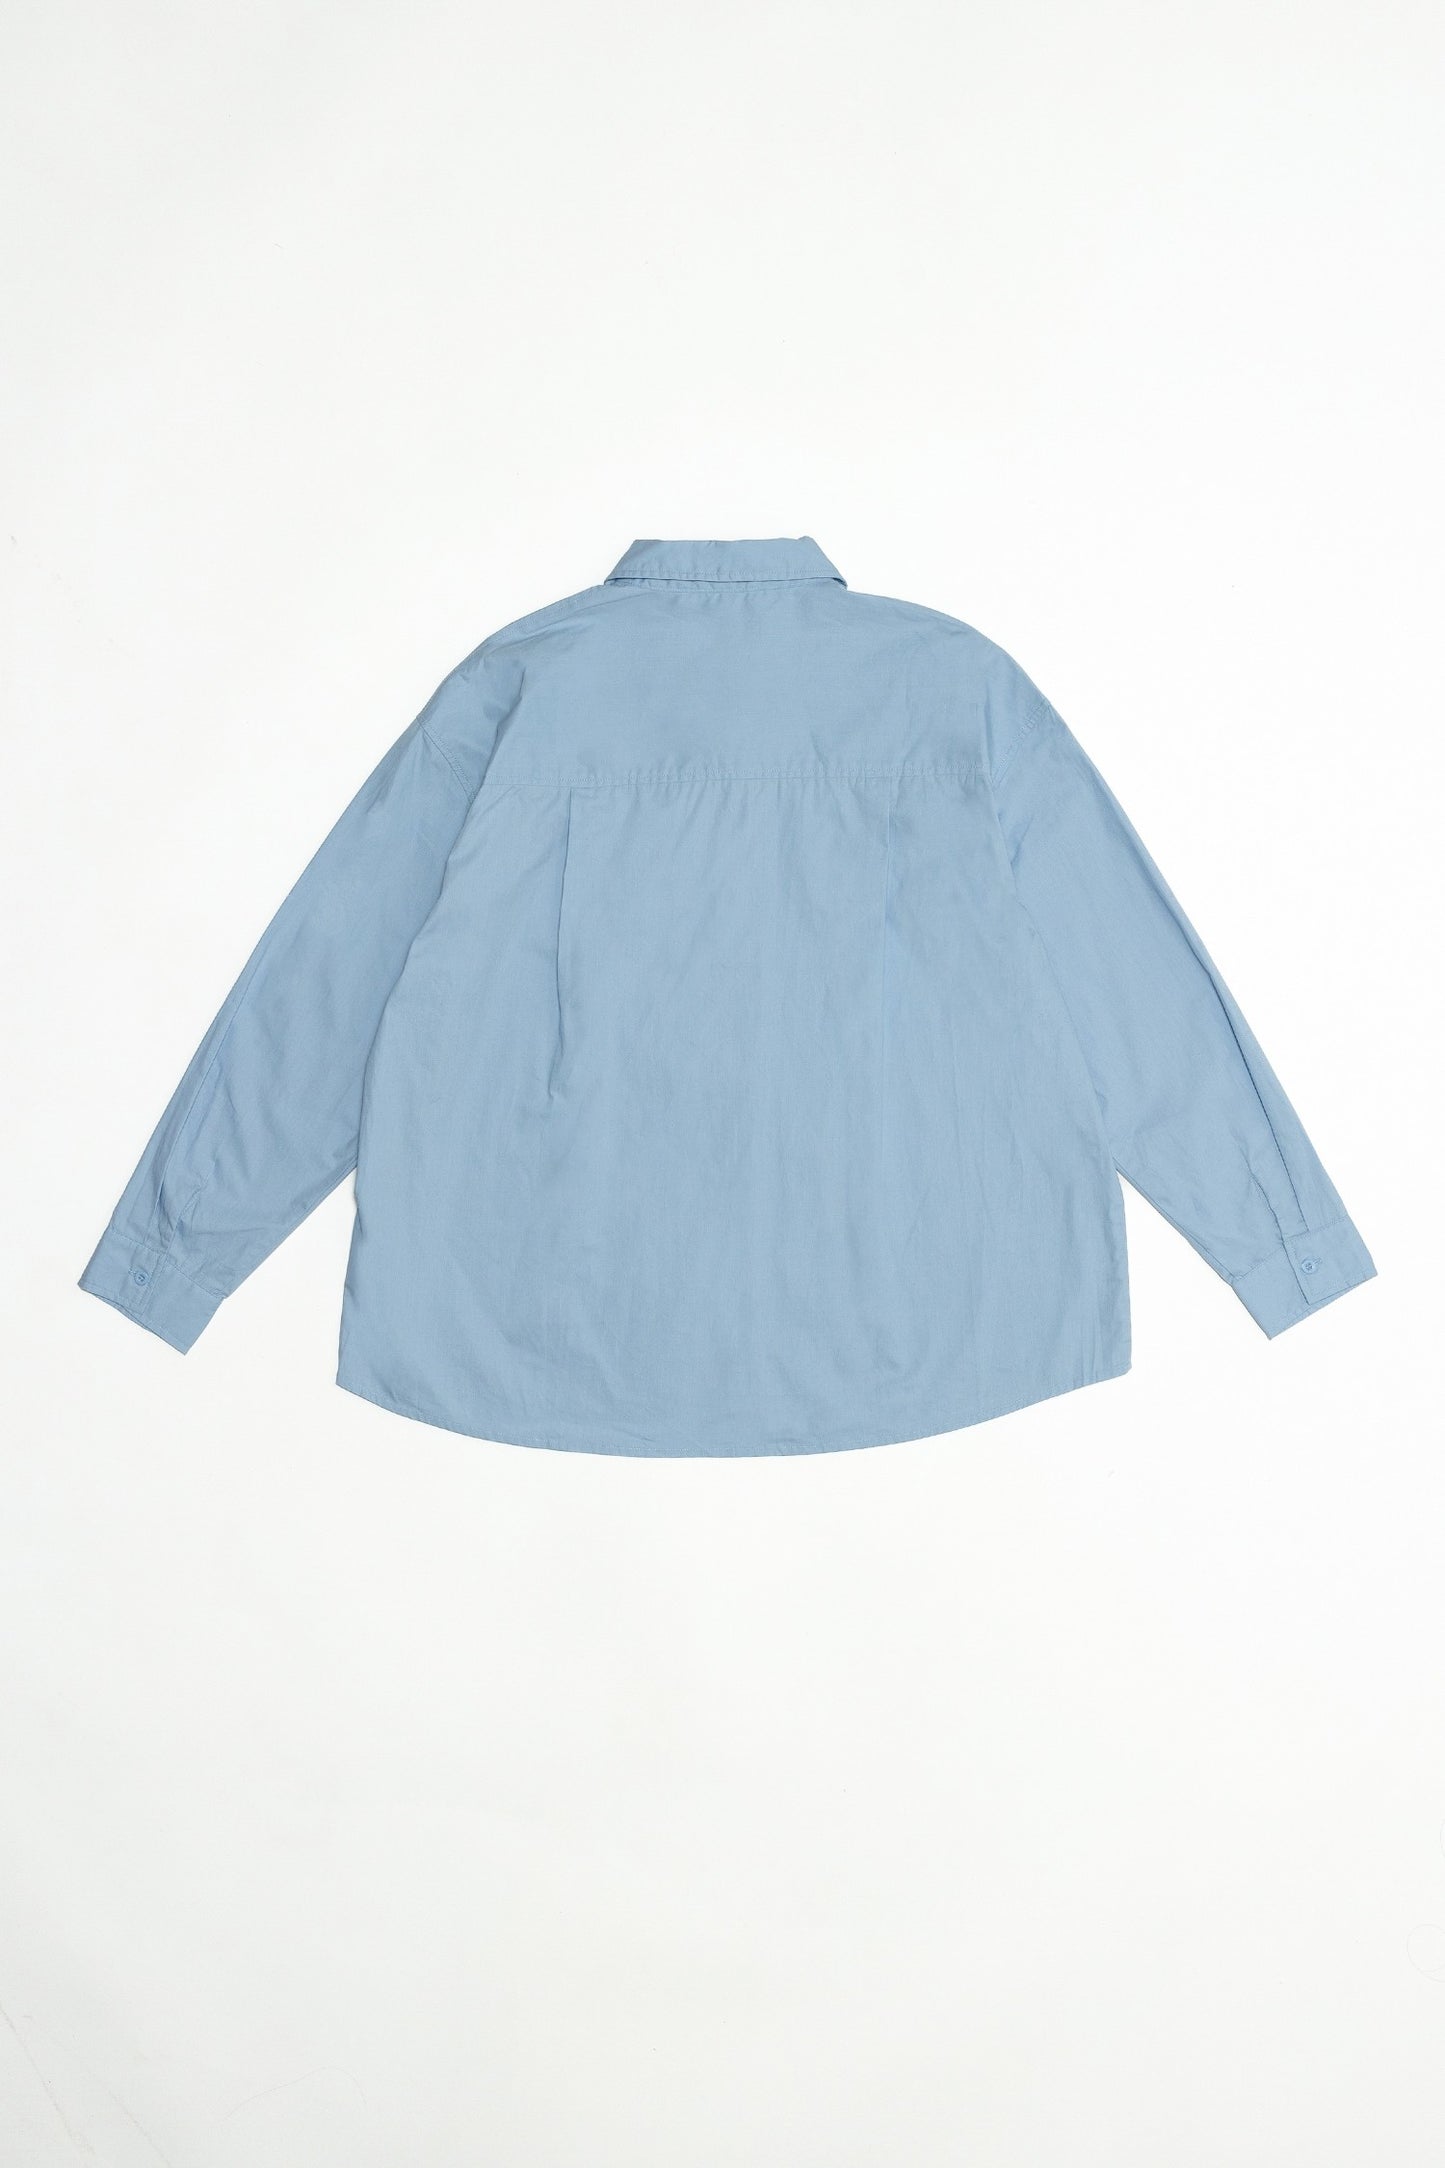 back of the blue button down shirt. 